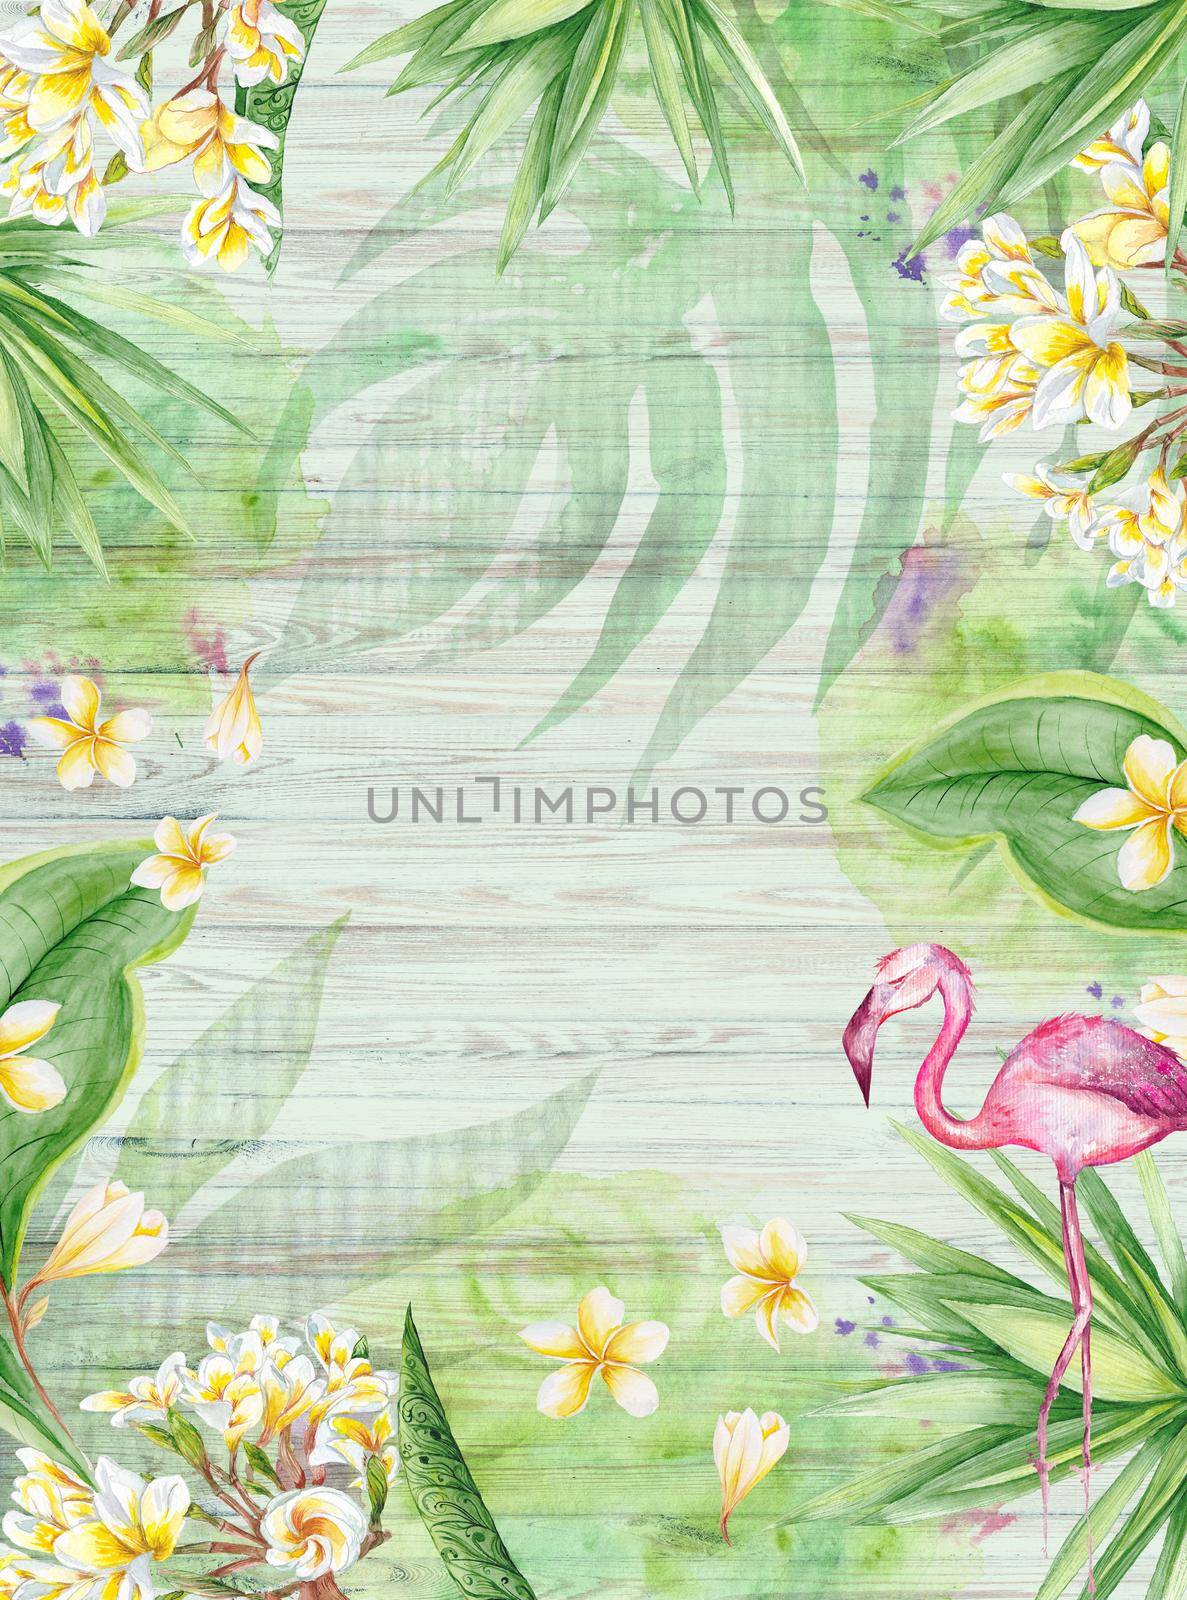 Watercolor Floral Tropical Vintage Wood Card Template by kisika